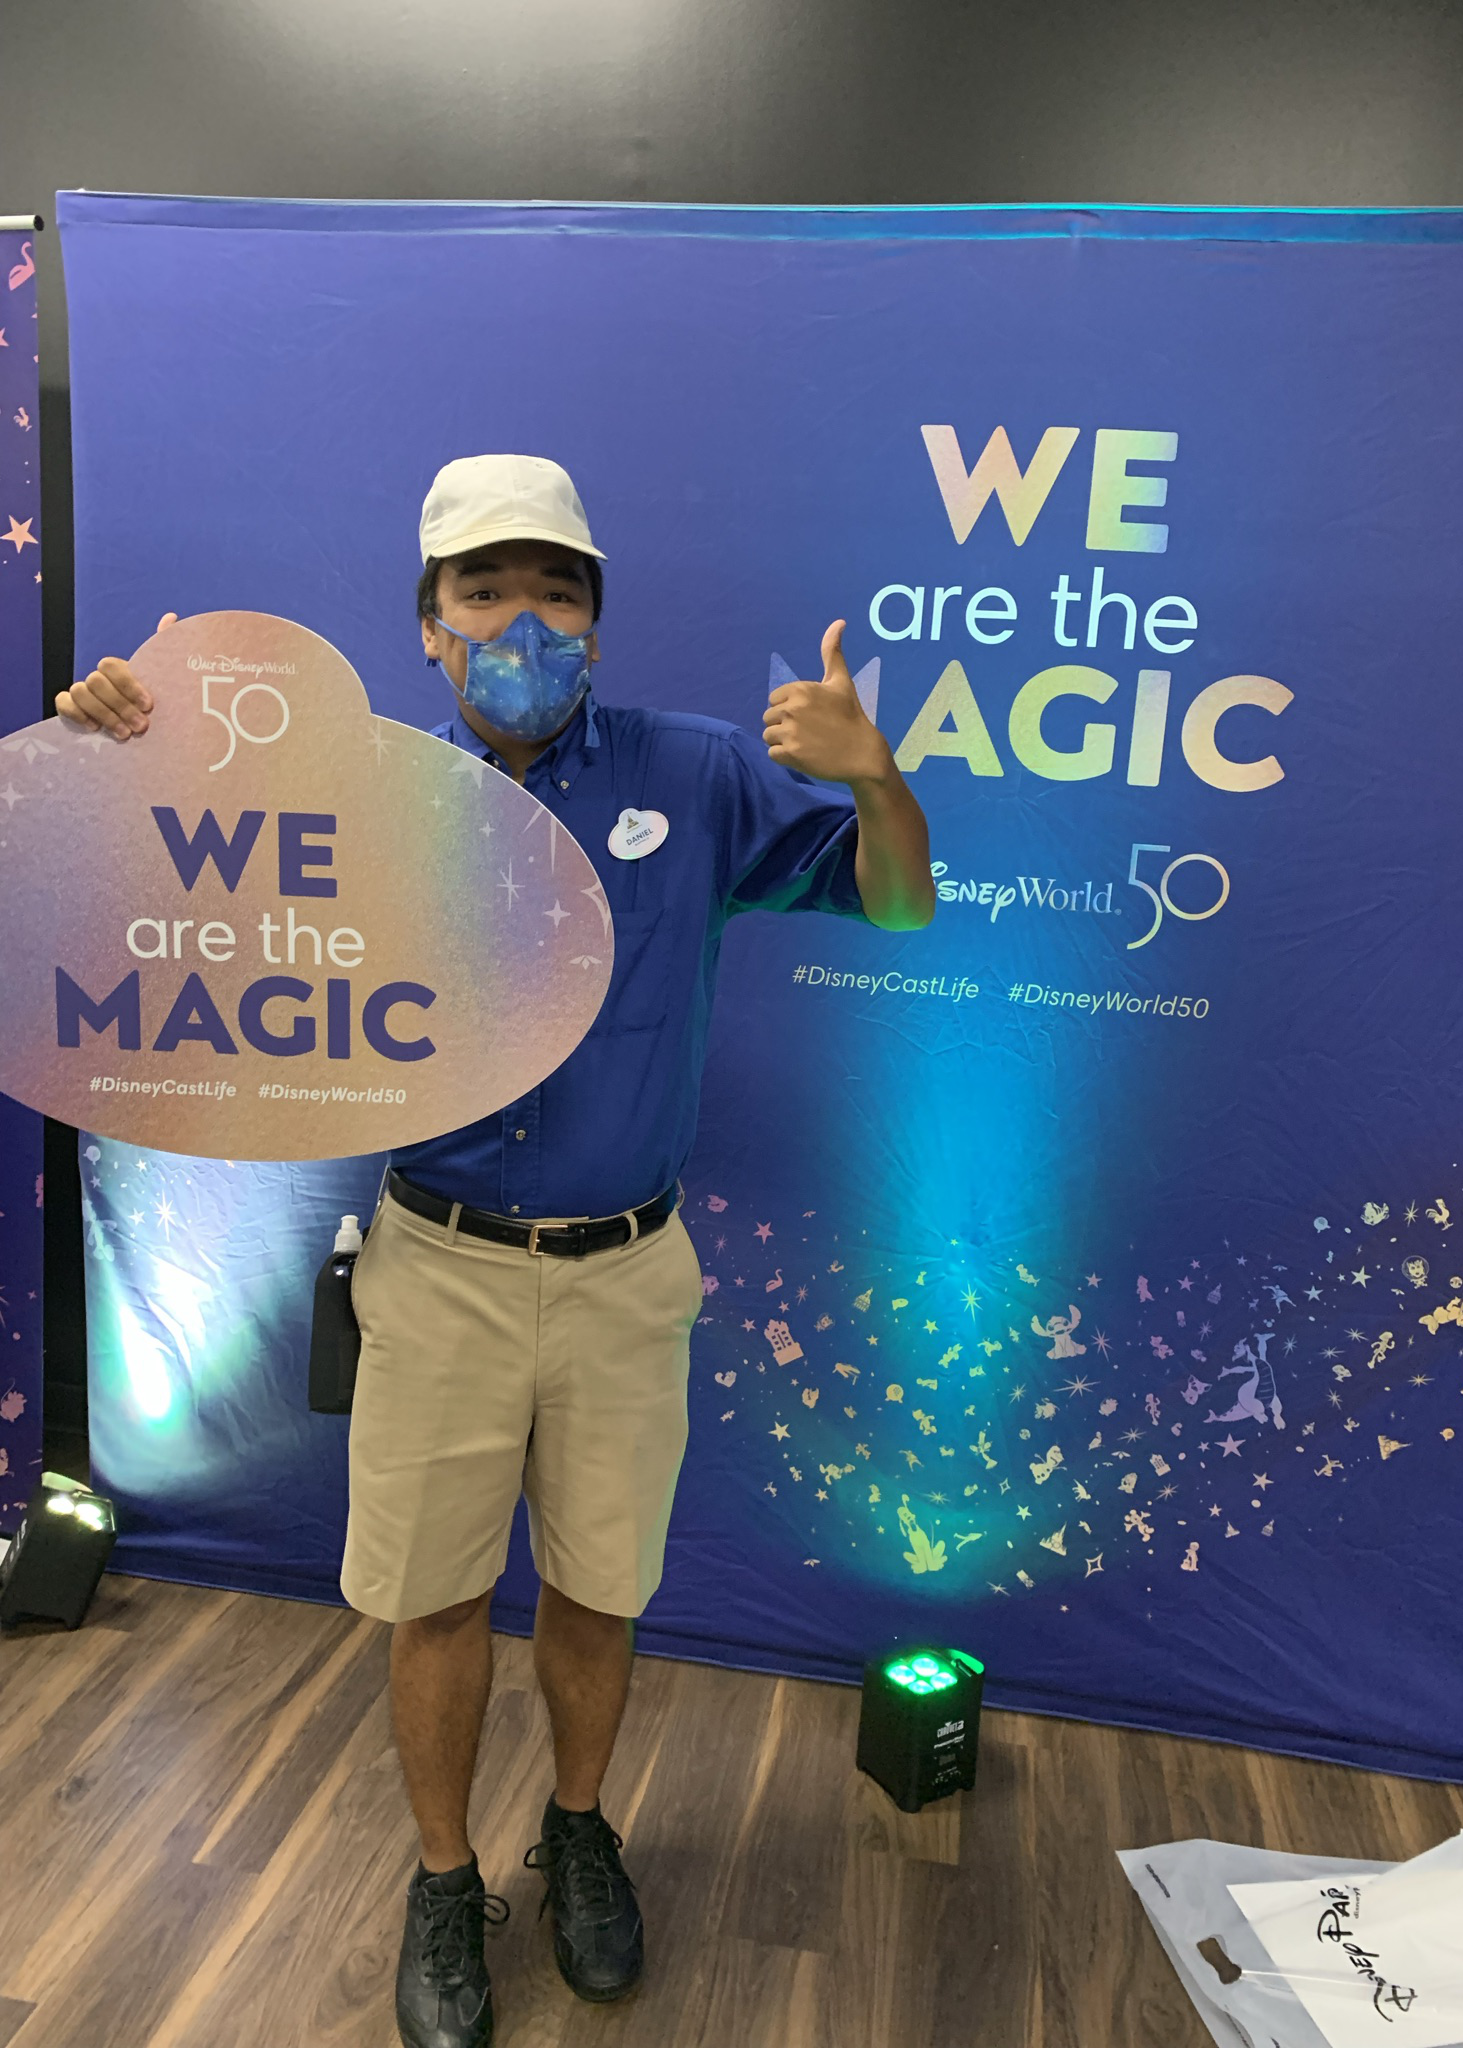 “I worked in food and beverage at Epcot festivals. I learned a lot about what Epcot has to offer annually and I learned about how food and beverage works at Walt Disney World. I met a lot of nice people too!” – Daniel